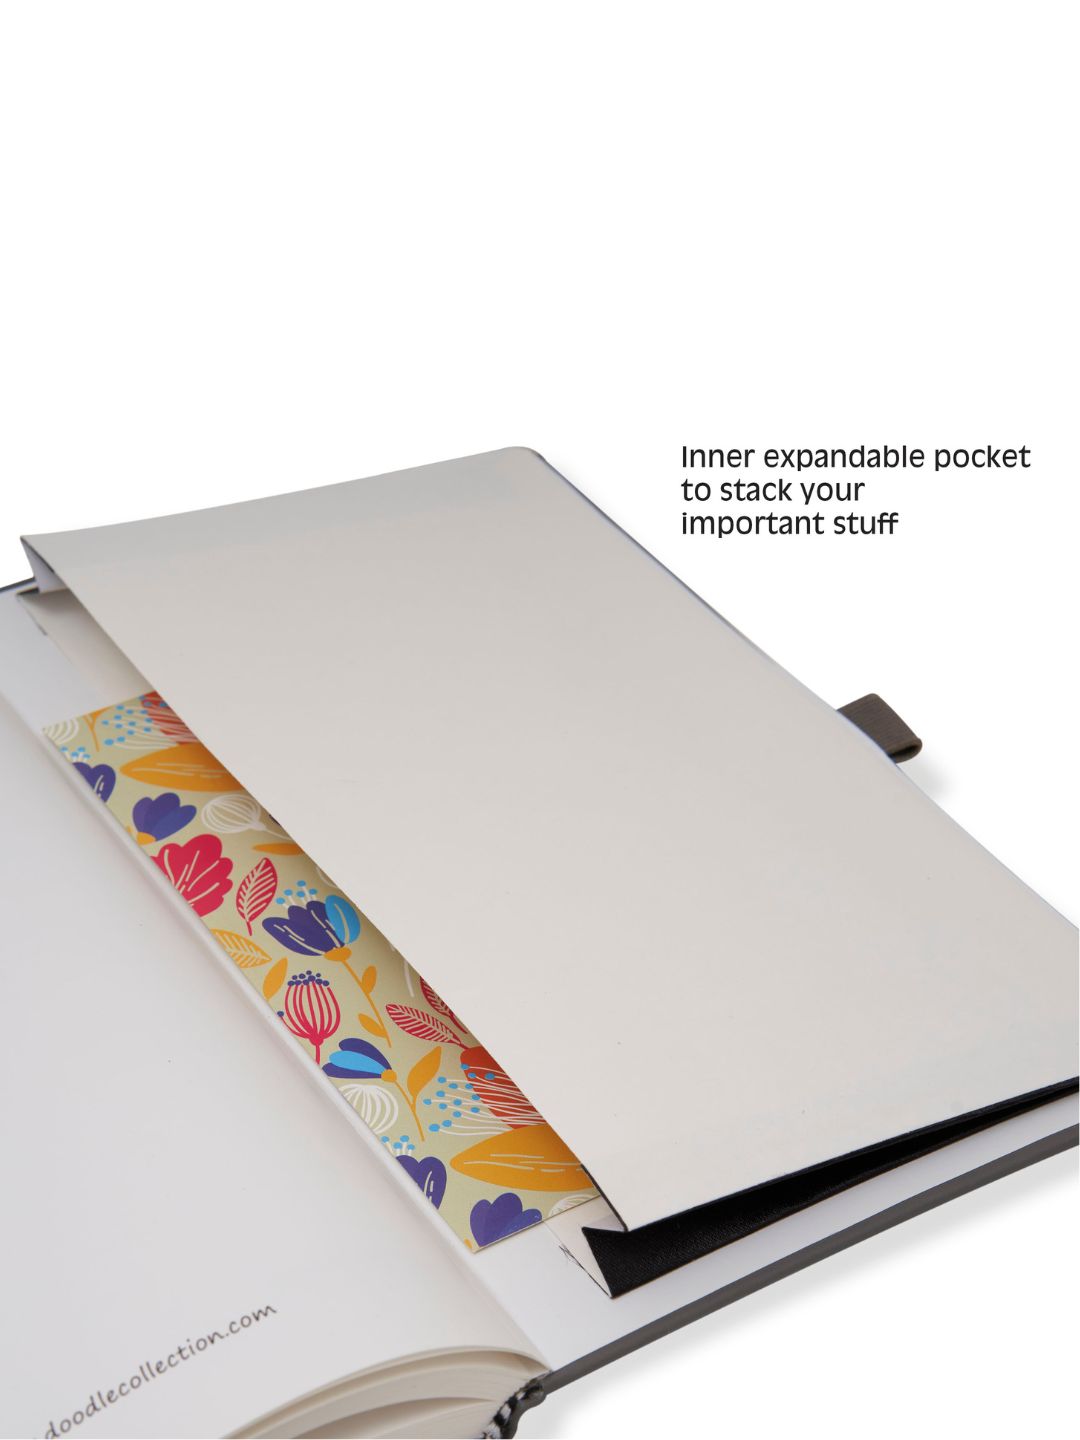 Pro Series Executive A5 PU Leather Hardbound Ruled Turkish Blue Notebook with Pen Loop [Happy Mind Happy Life]